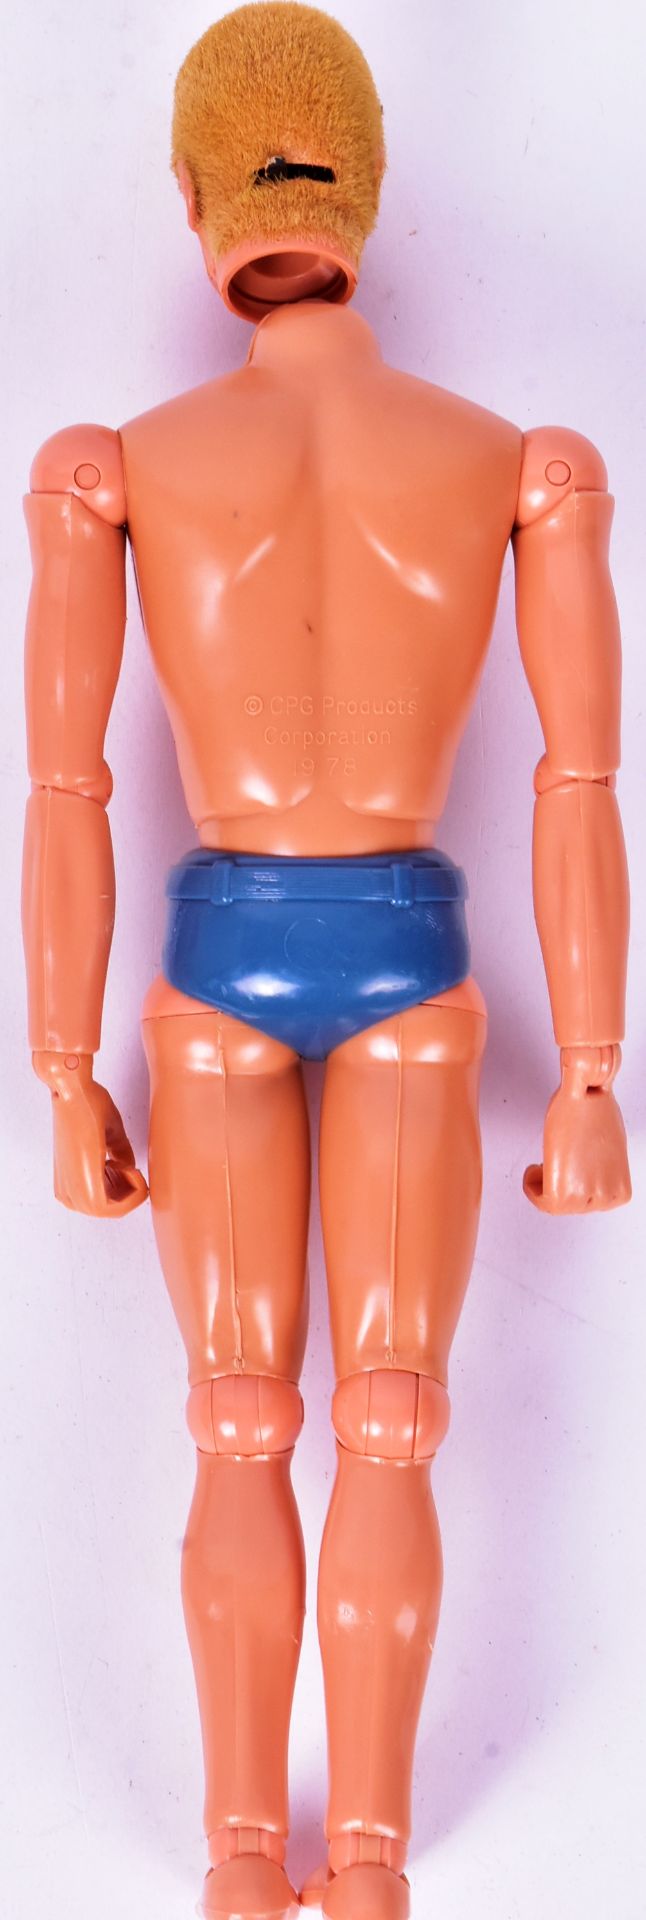 ACTION MAN - VINTAGE PALITOY SPECIAL OPERATIONS ACTION MAN - Image 5 of 5